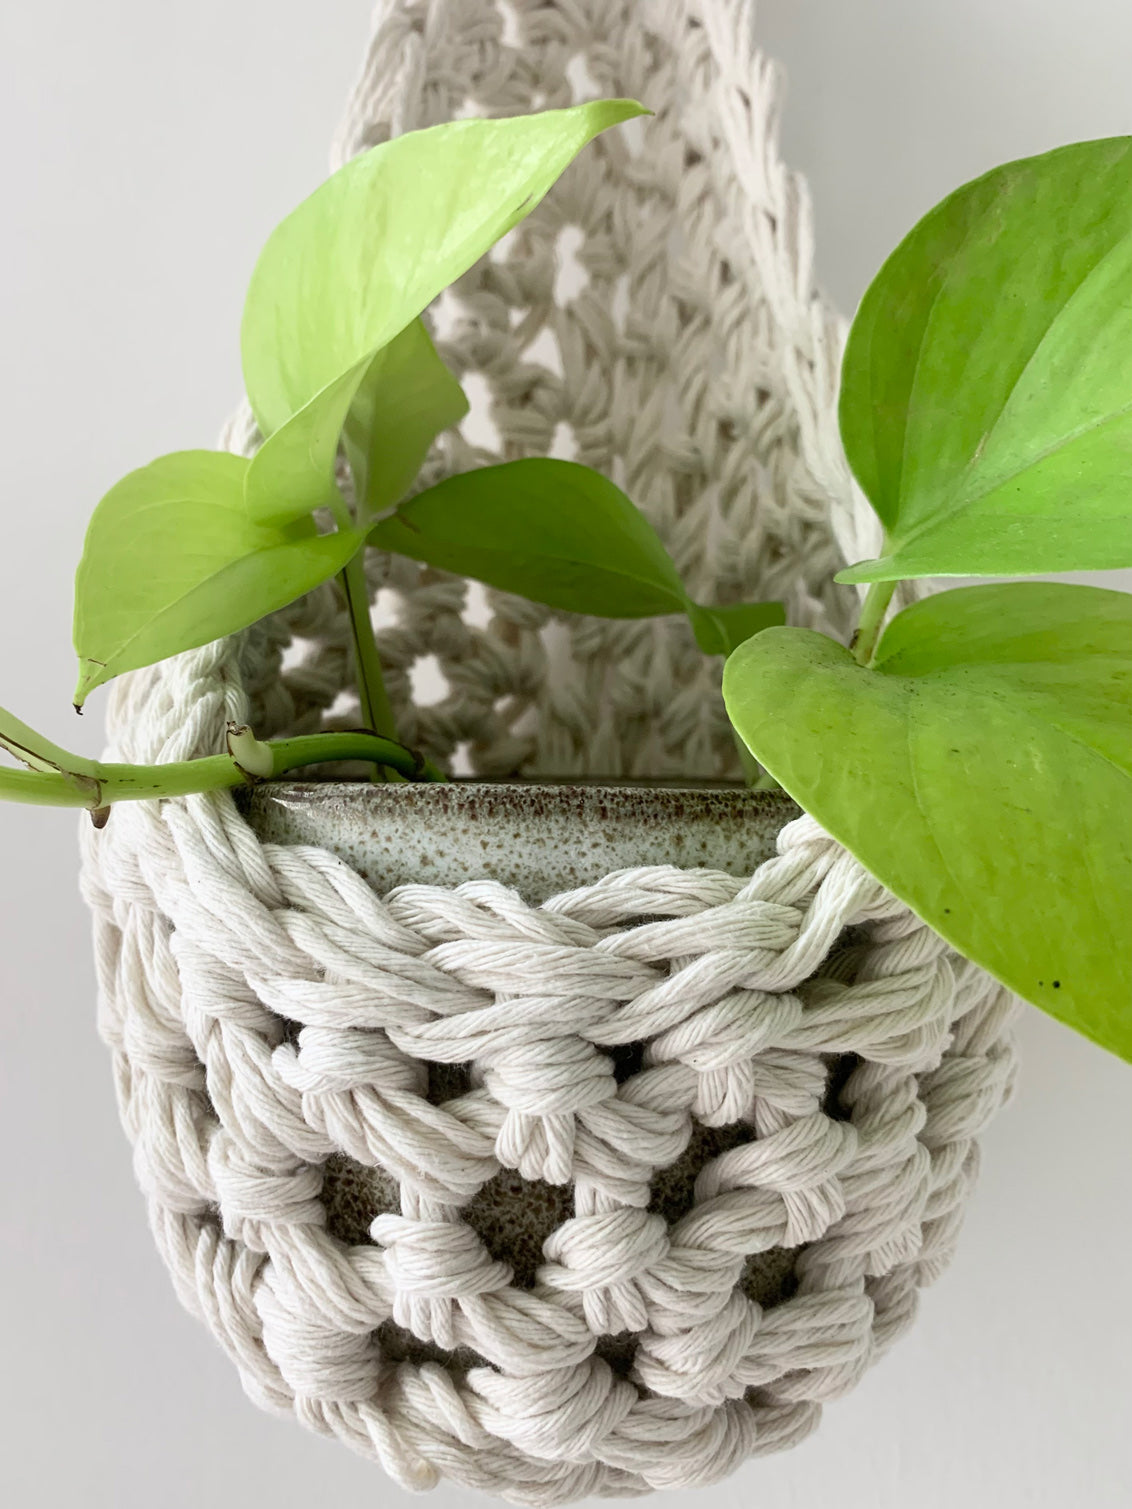 mage showing close up crochet details of tierdrop shape white cotton plant hanger, containing pot and plant. To give an idea of how the planter would look in situ and the woven texture of the fibres.